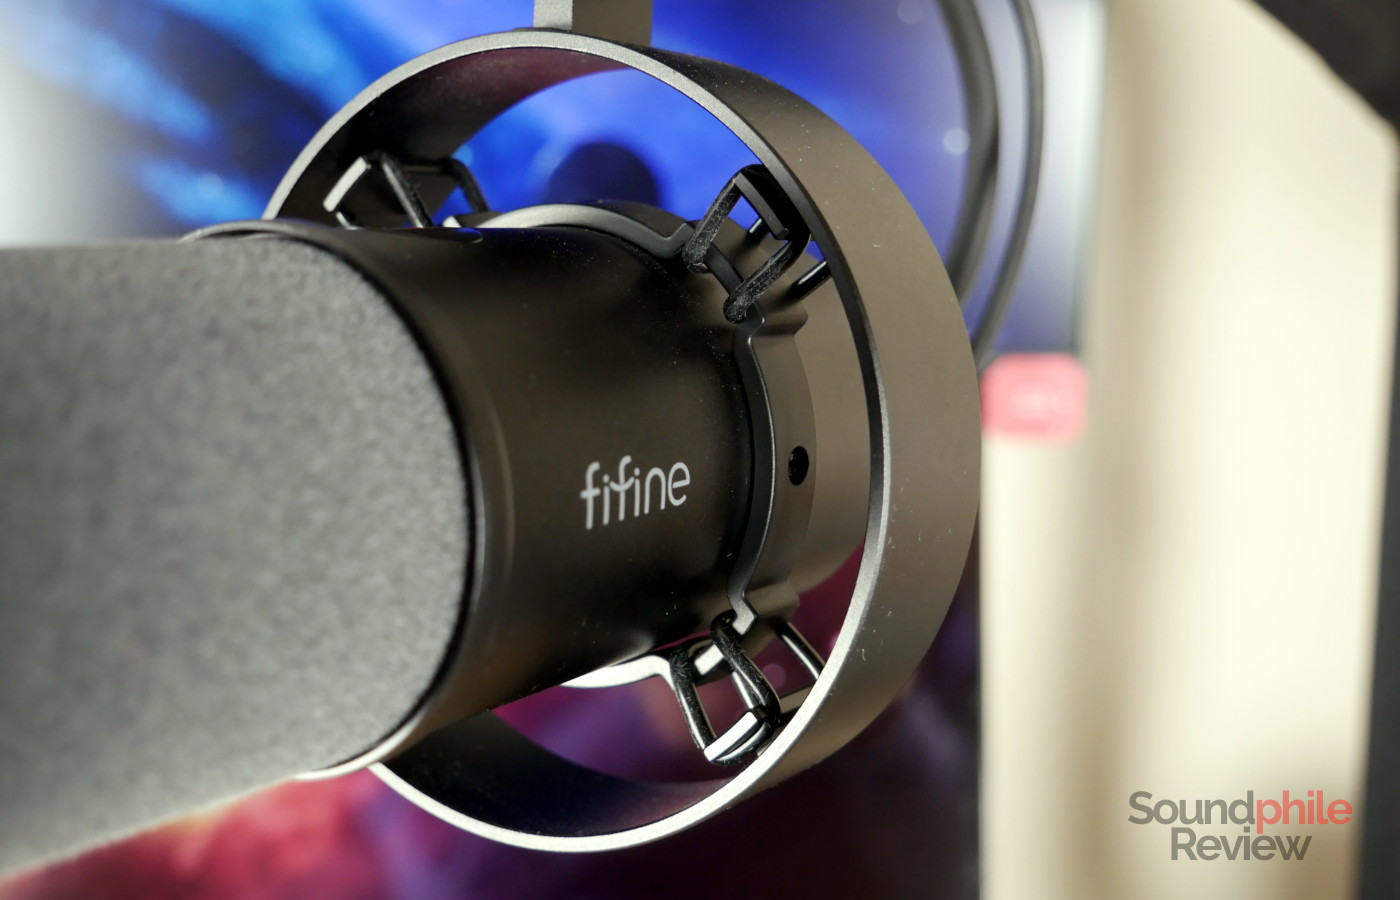 Review: FiFine K688 dynamic hybrid studio mic with shockmount and